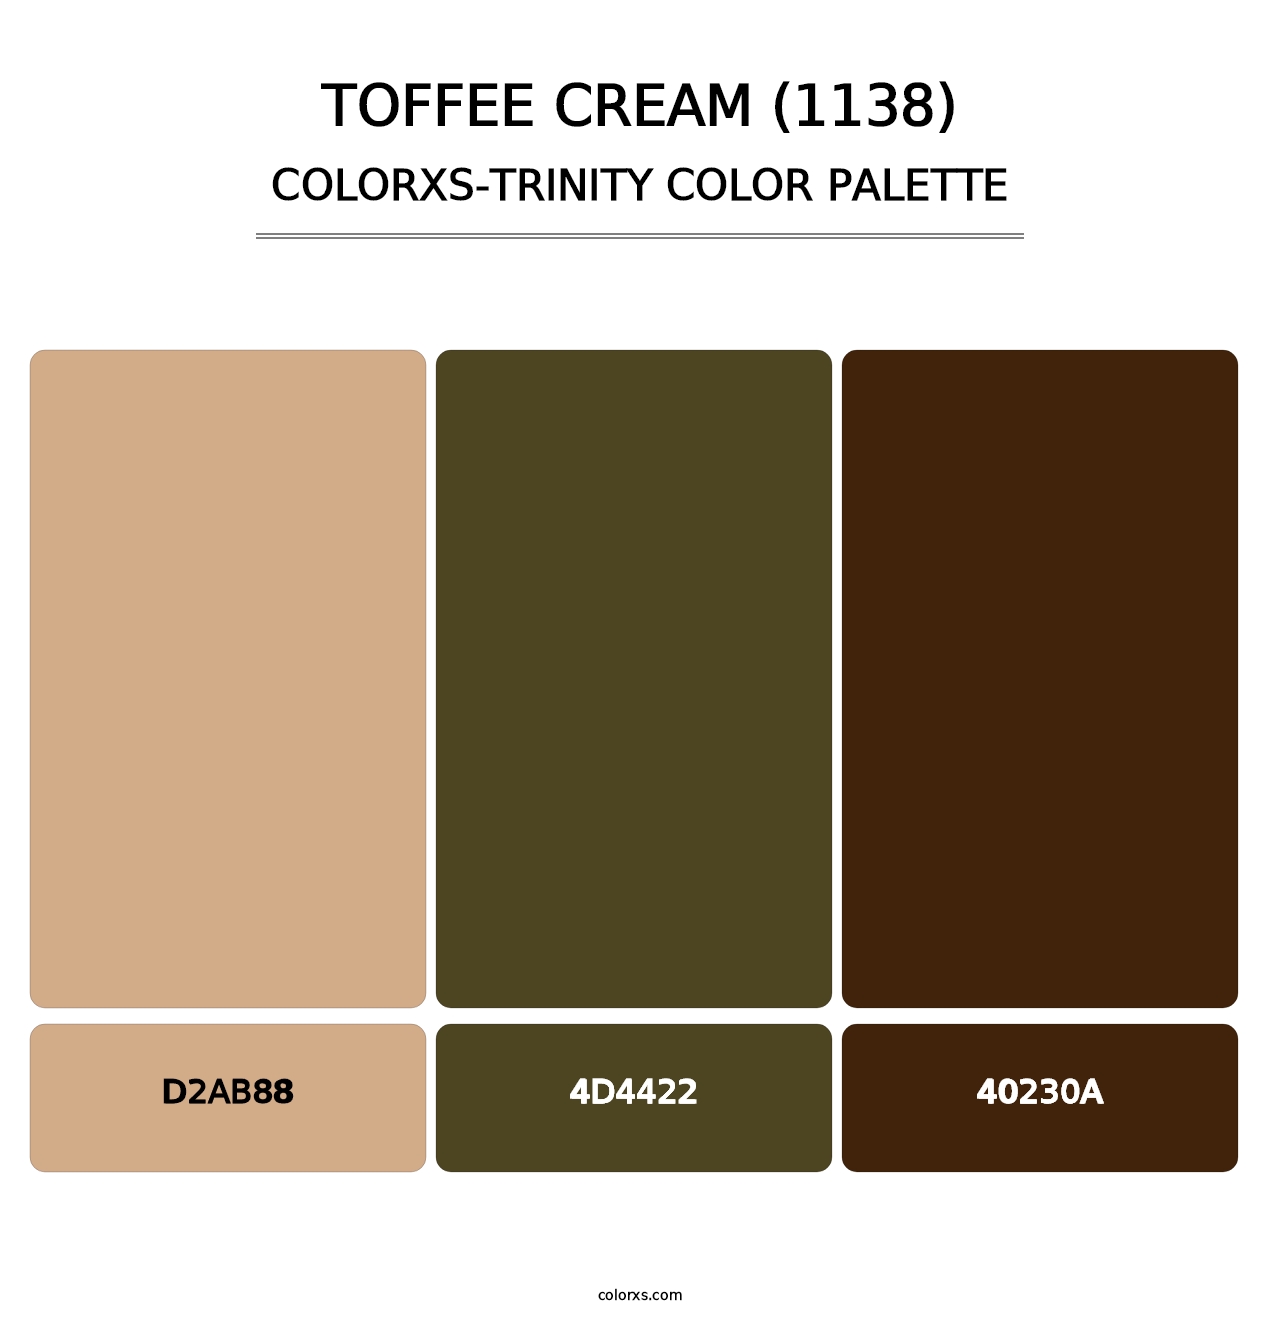 Toffee Cream (1138) - Colorxs Trinity Palette